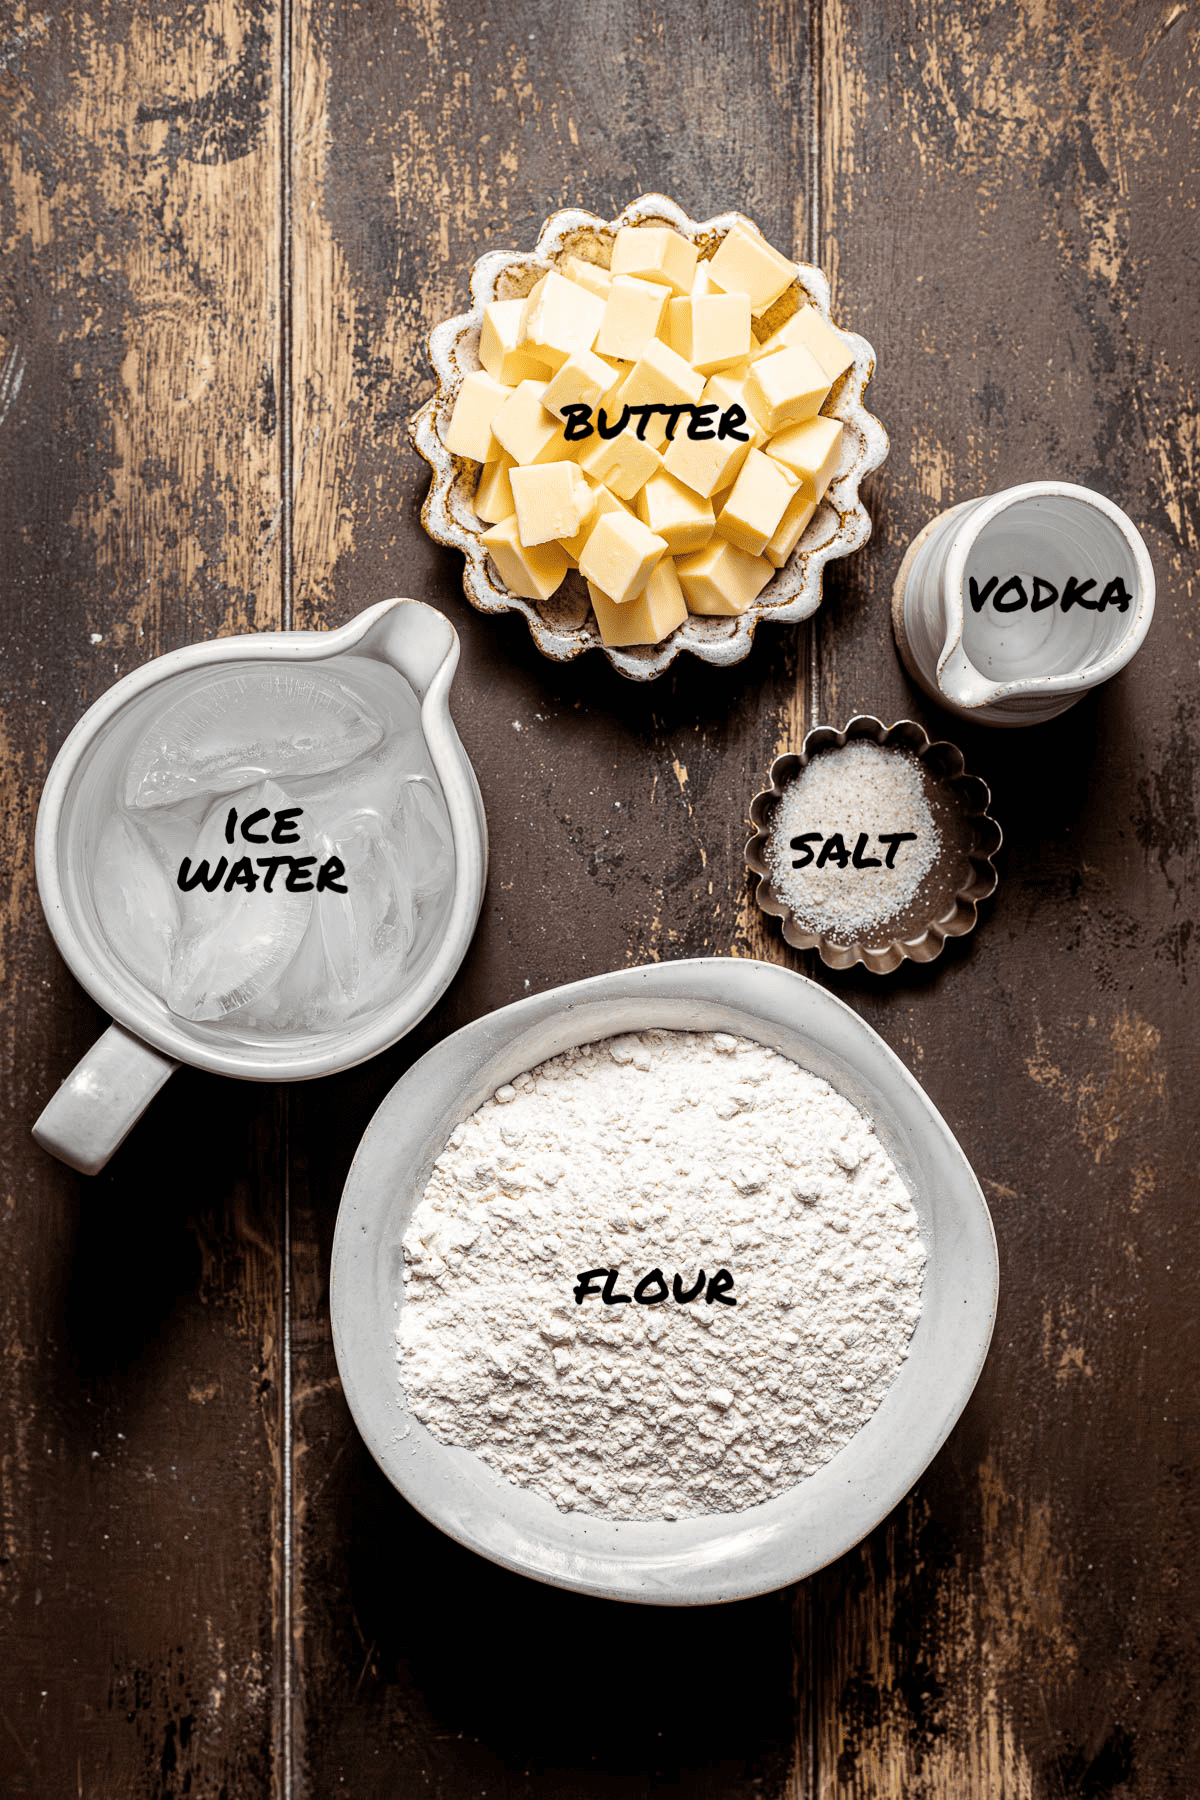 ingredients for the pie crust.